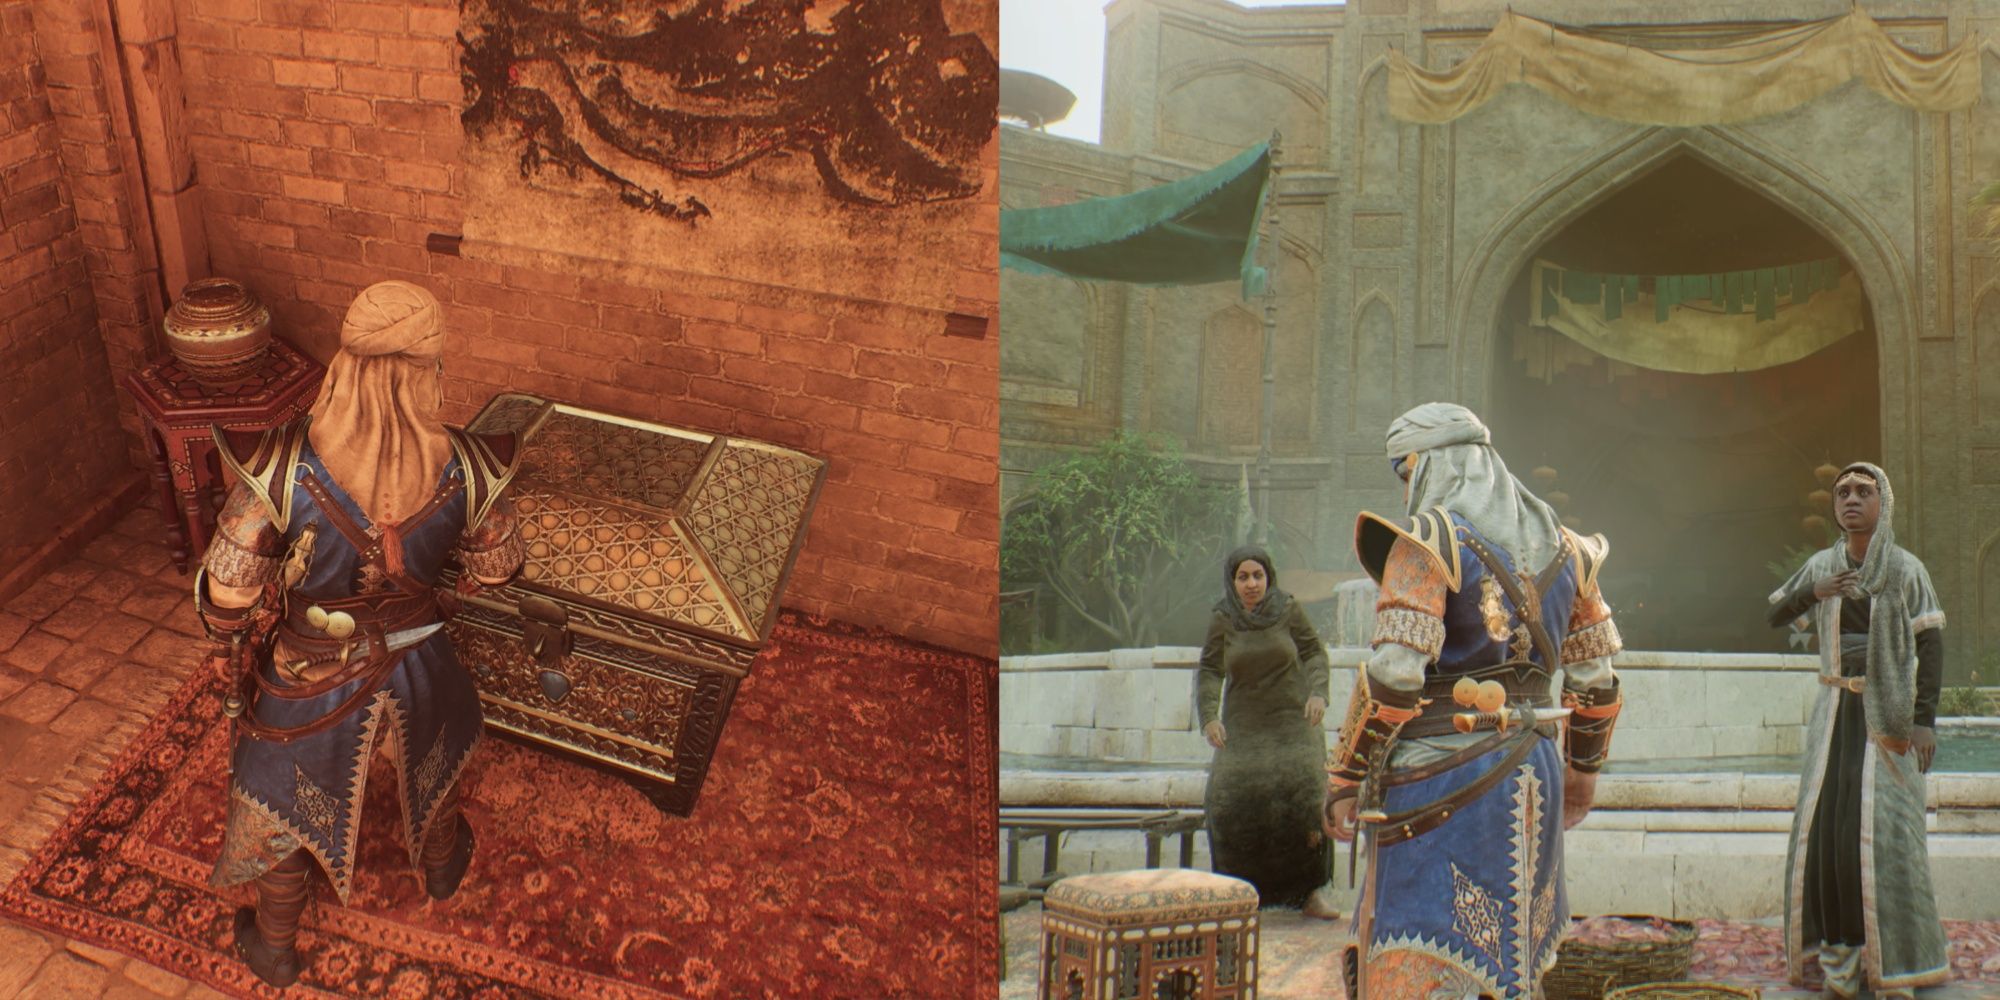 Basim finding rare gear chest in the Bazaar area in Assassin's Creed Mirage